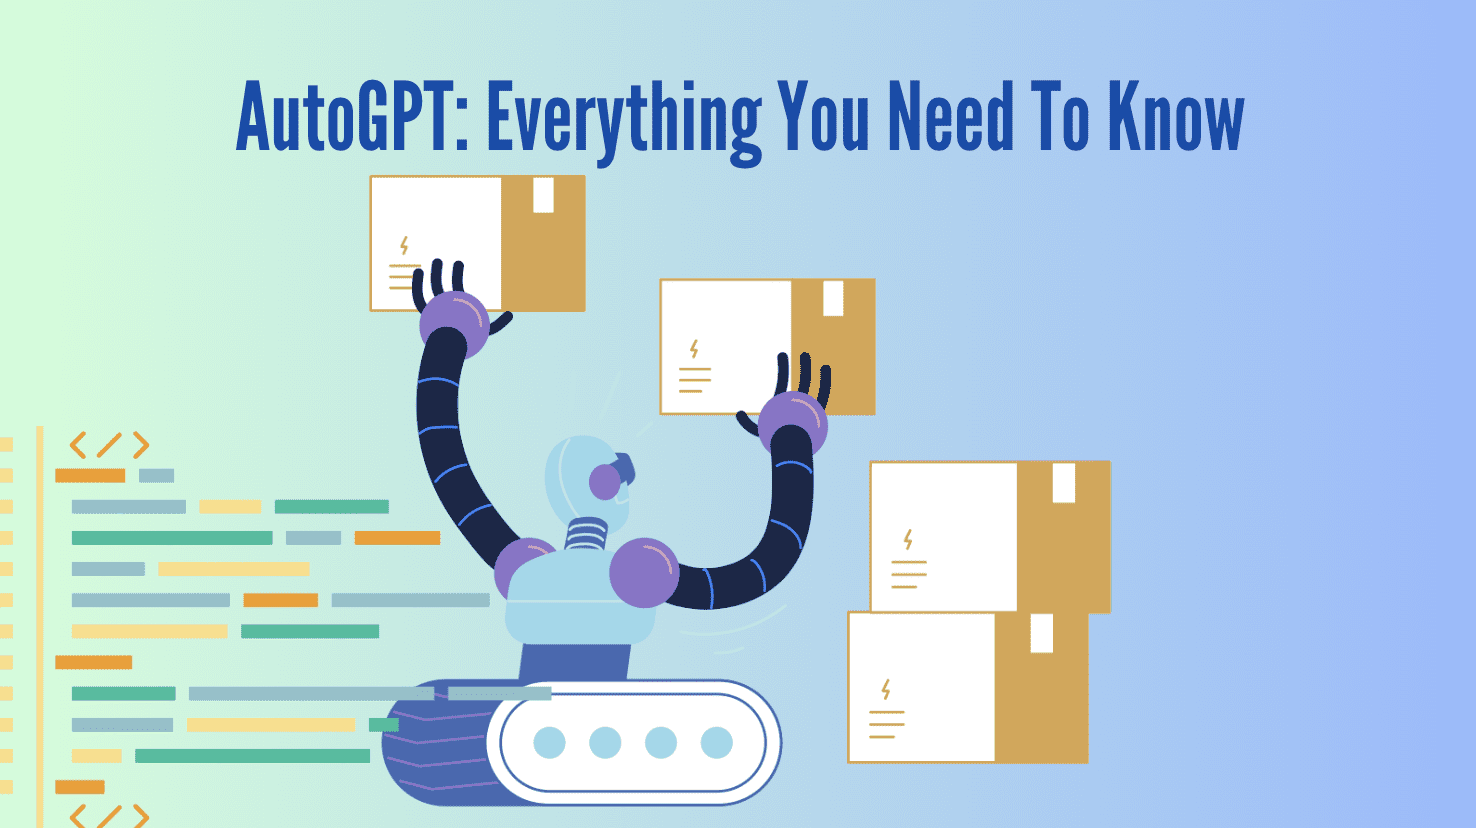 AutoGPT: Everything You Need To Know